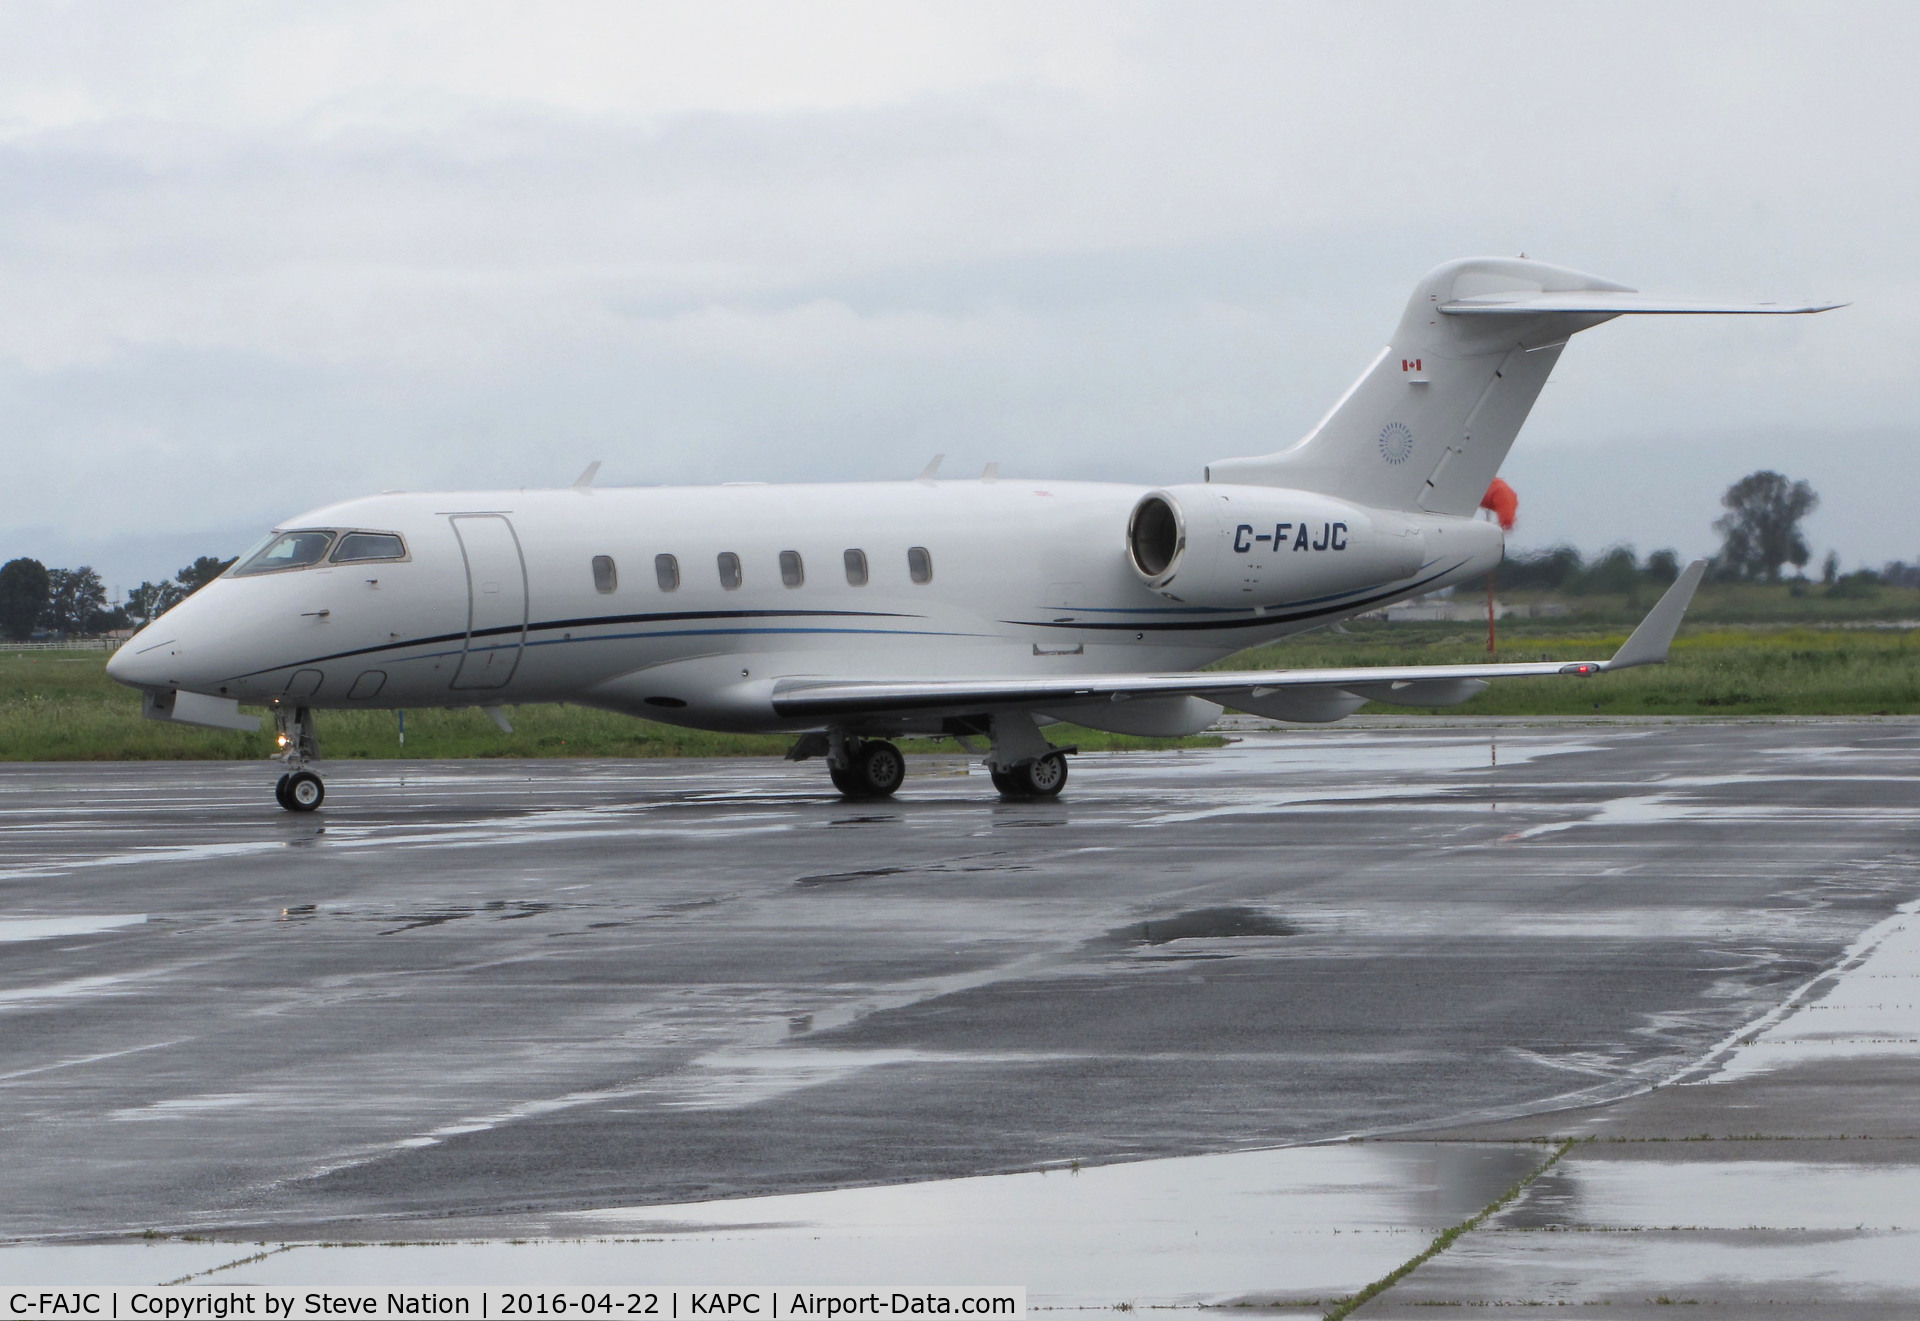 C-FAJC, 2013 Bombardier Challenger 300 (BD-100-1A10) C/N 20384, Morningstar Partners Ltd 2013 Bombardier Challenger 300 (BD-100-1A10) arriving on a rainy morning @ Napa County Airport, CA